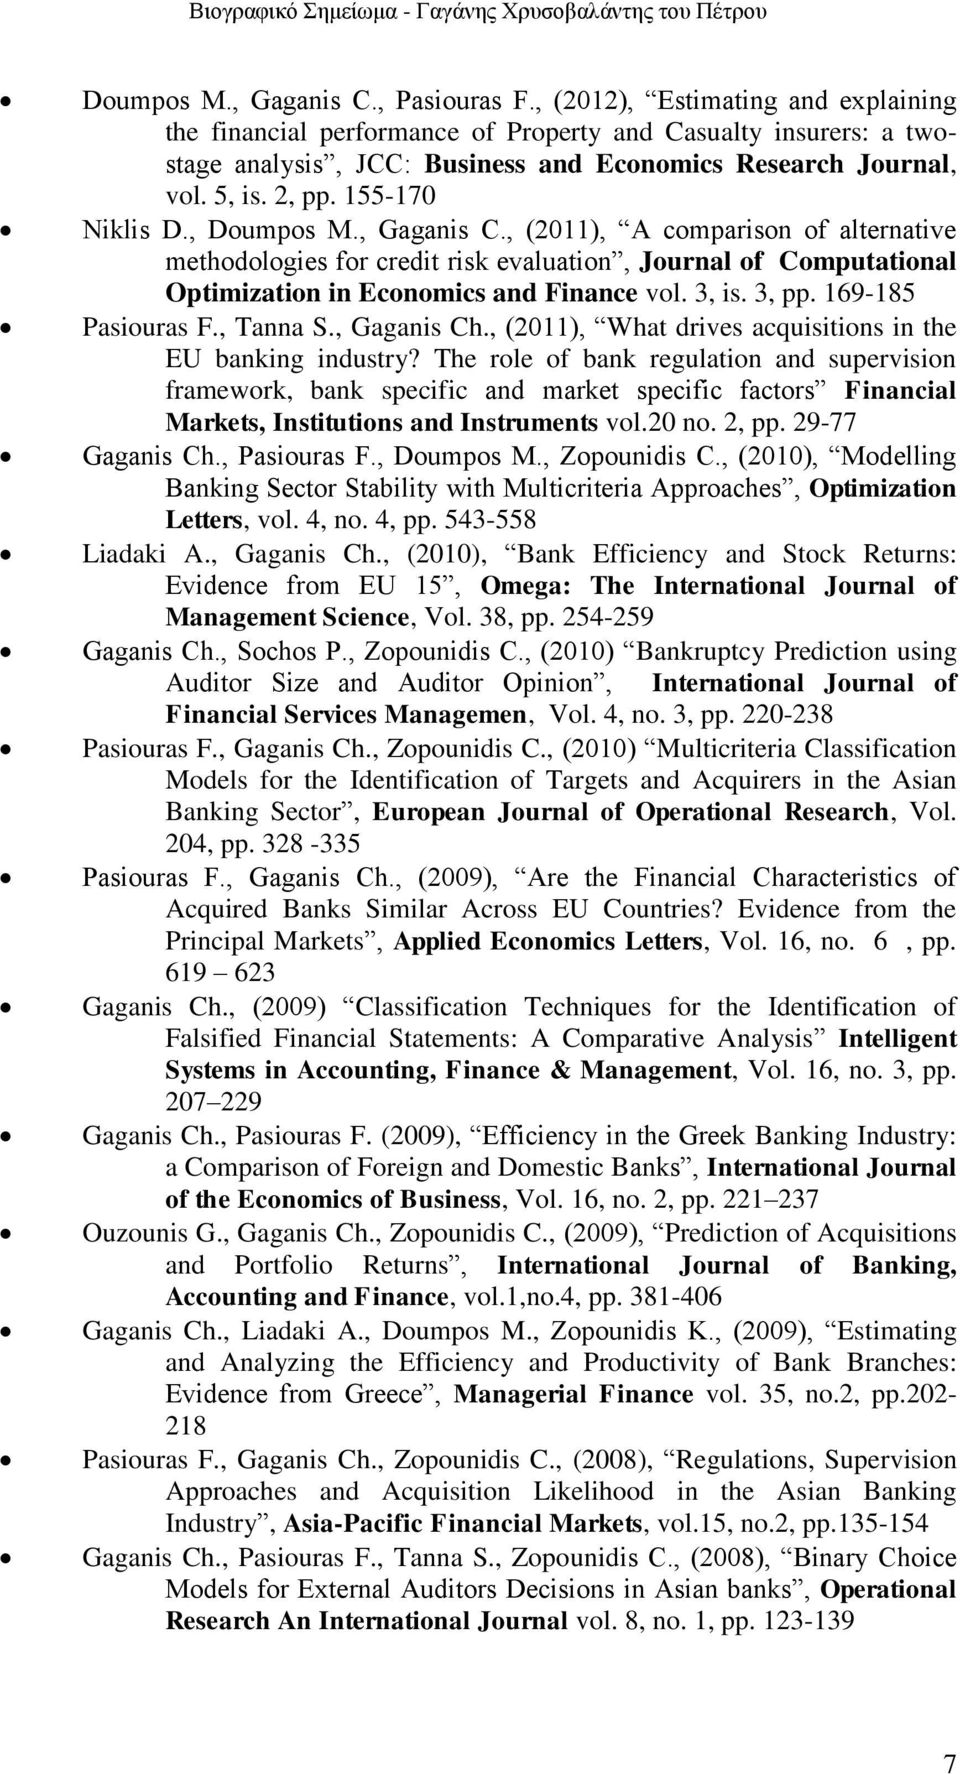 , Doumpos M., Gaganis C., (2011), A comparison of alternative methodologies for credit risk evaluation, Journal of Computational Optimization in Economics and Finance vol. 3, is. 3, pp.